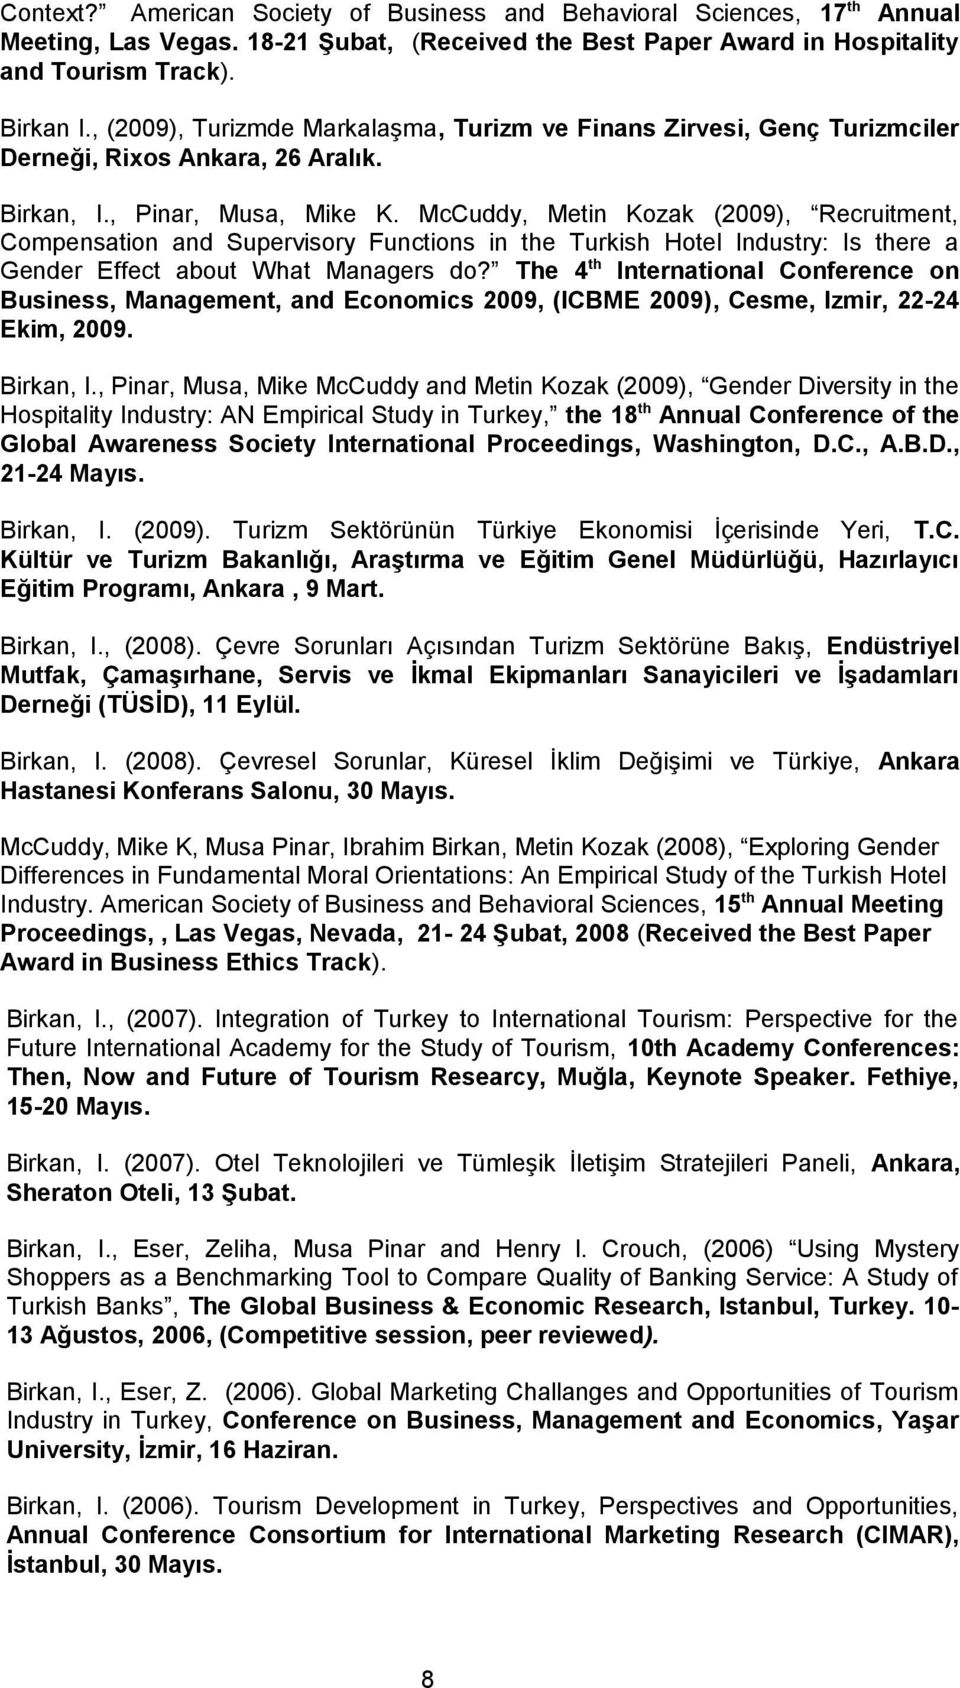 McCuddy, Metin Kozak (2009), Recruitment, Compensation and Supervisory Functions in the Turkish Hotel Industry: Is there a Gender Effect about What Managers do?